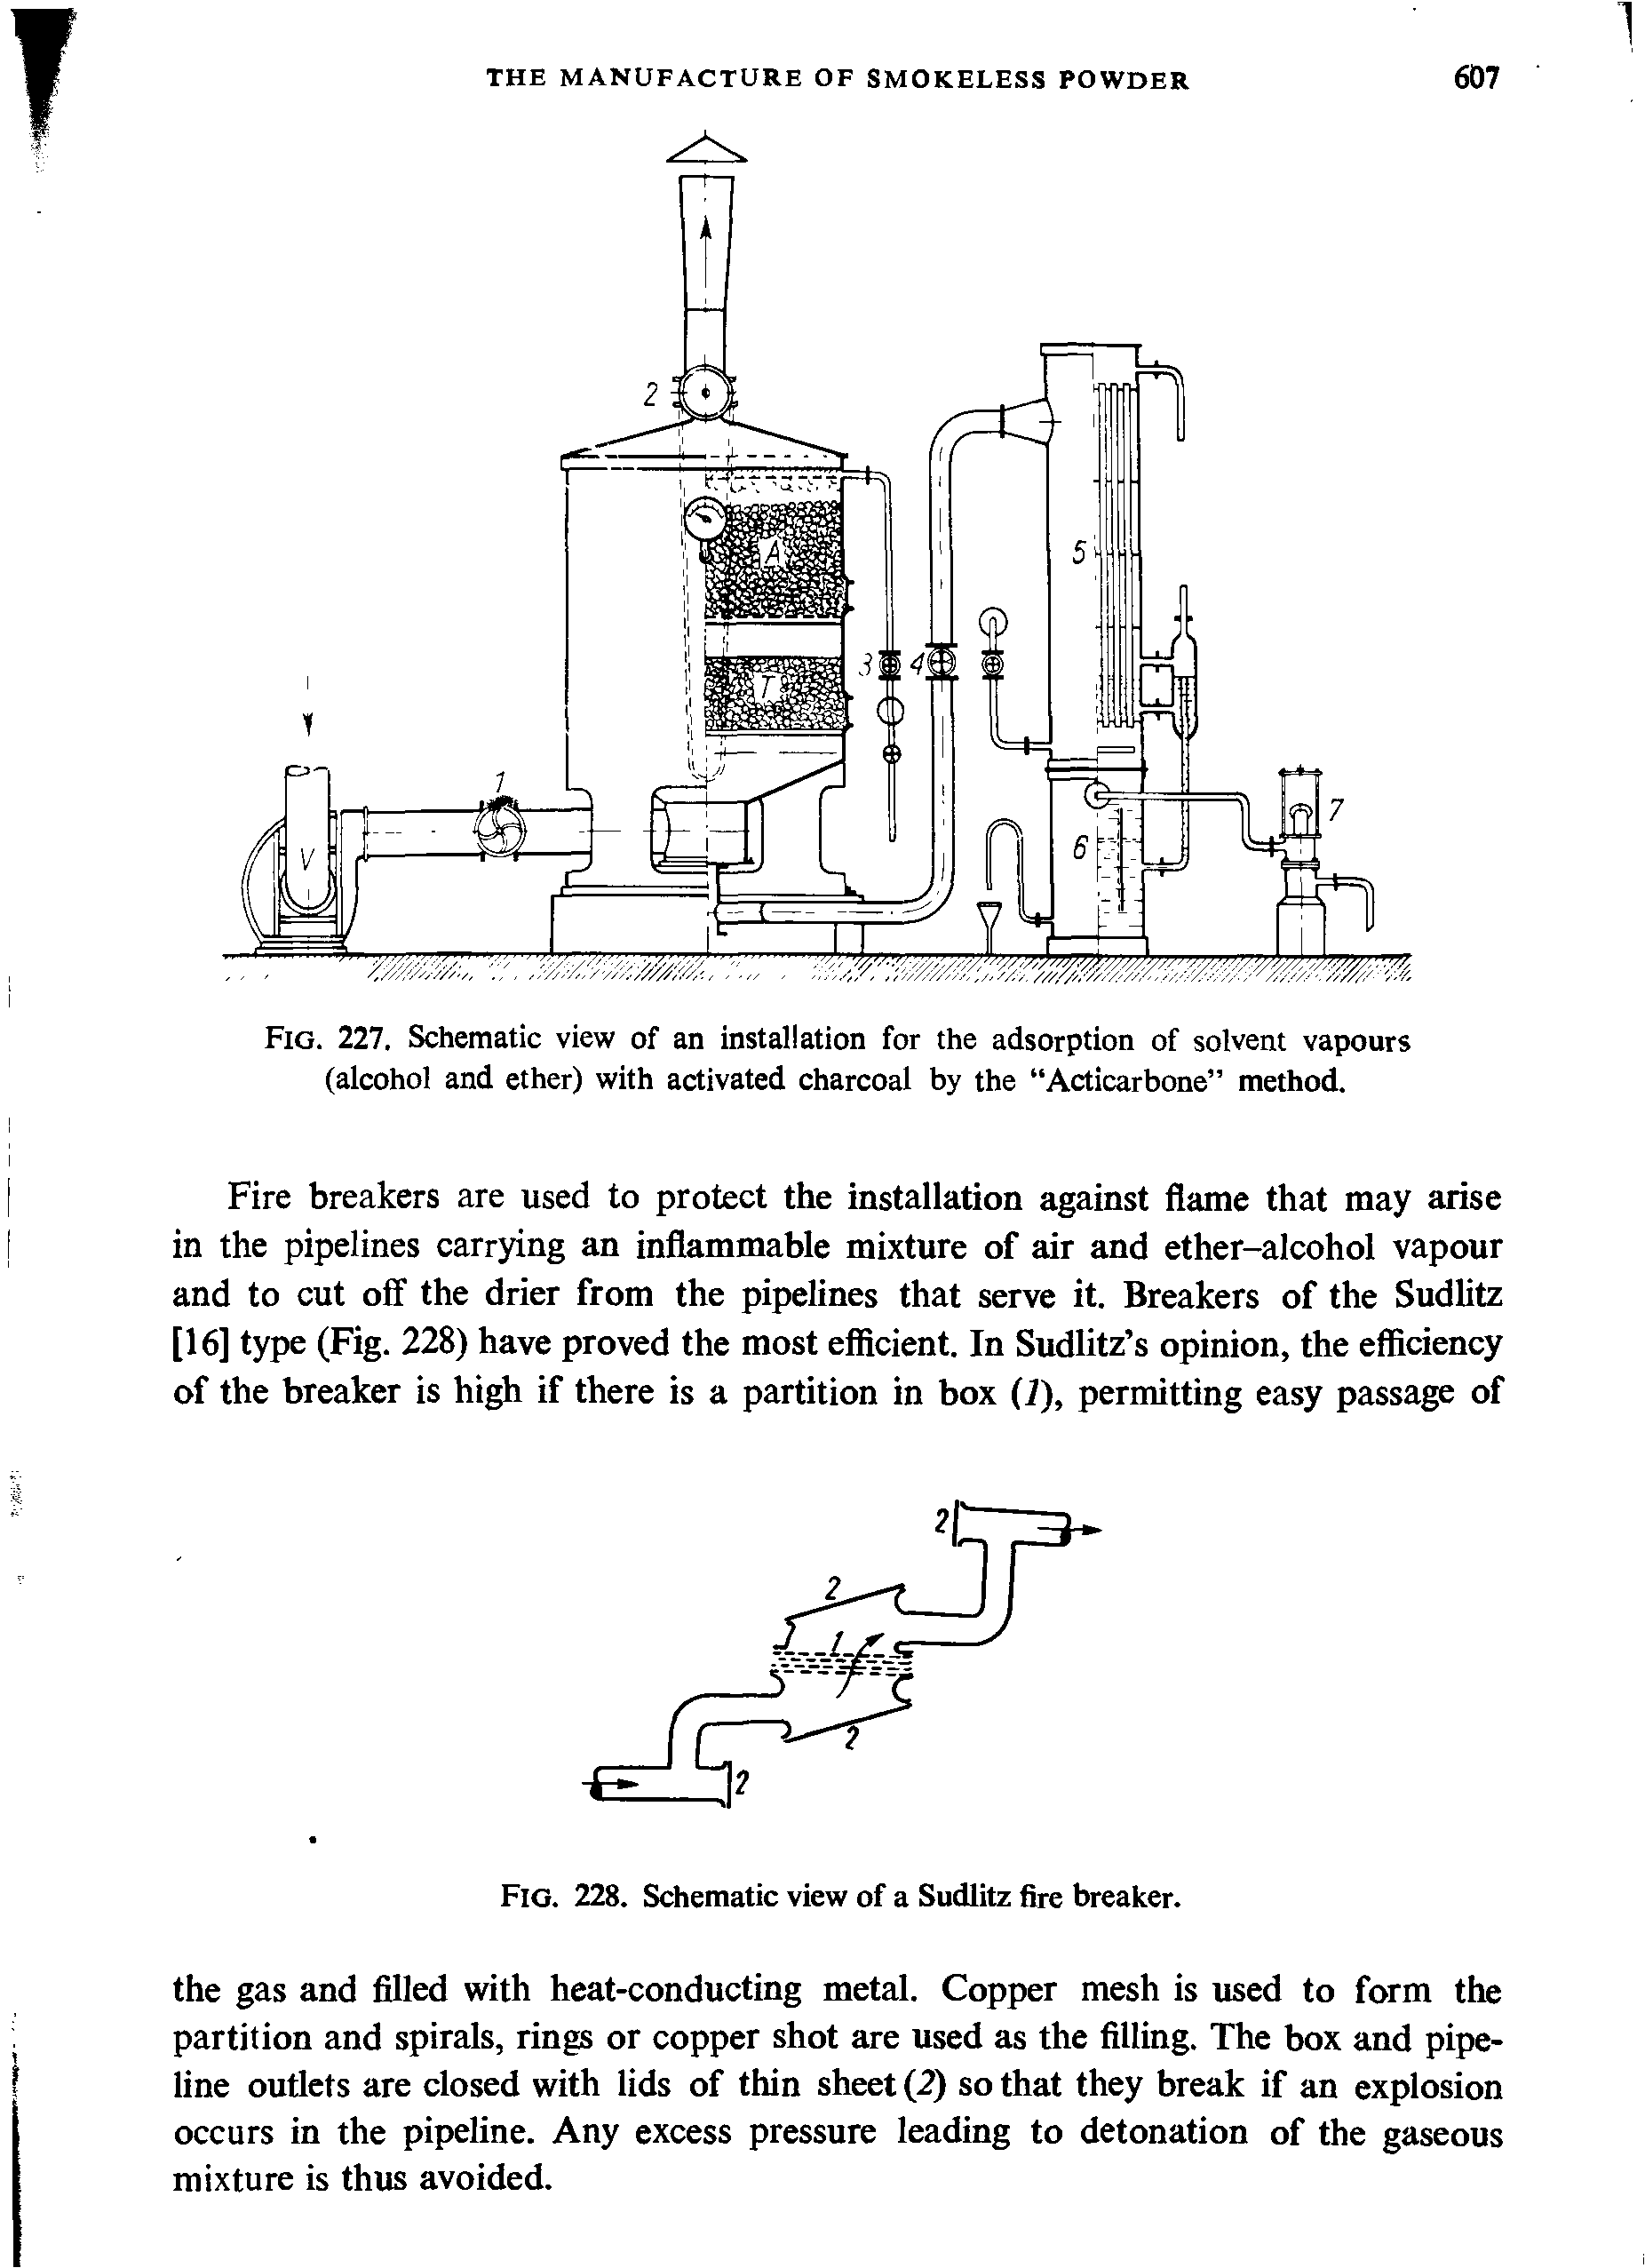 Fig. 227. Schematic view of an installation for the adsorption of solvent vapours (alcohol and ether) with activated charcoal by the Acticarbone method.